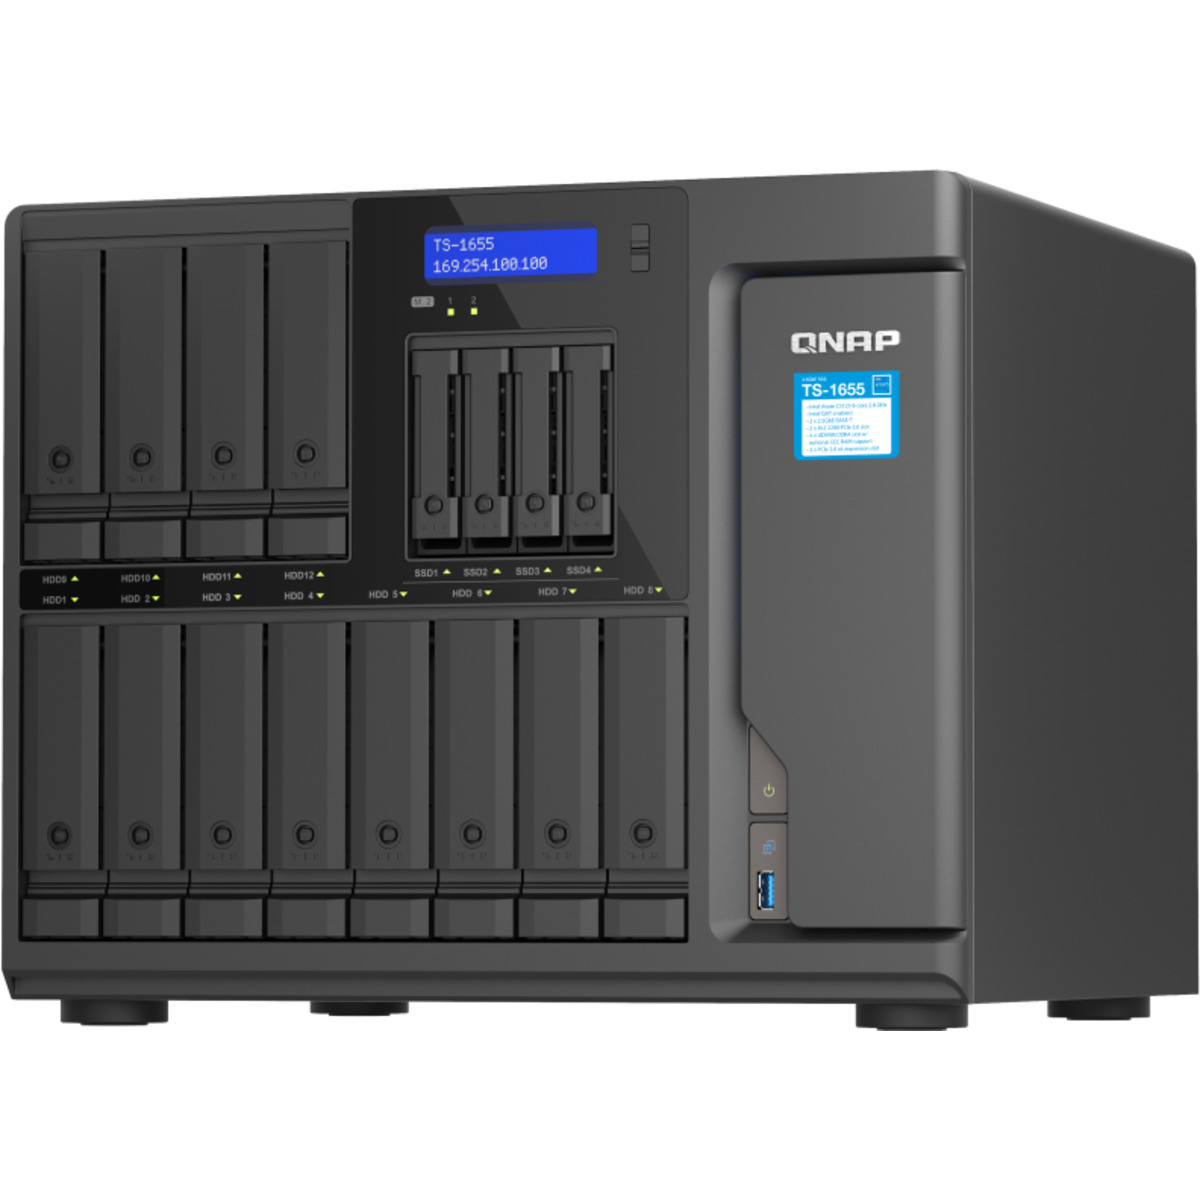 buy QNAP TS-1655 Desktop NAS - Network Attached Storage Device Burn-In Tested Configurations - FREE RAM UPGRADE - nas headquarters buy network attached storage server device das new raid-5 free shipping usa TS-1655